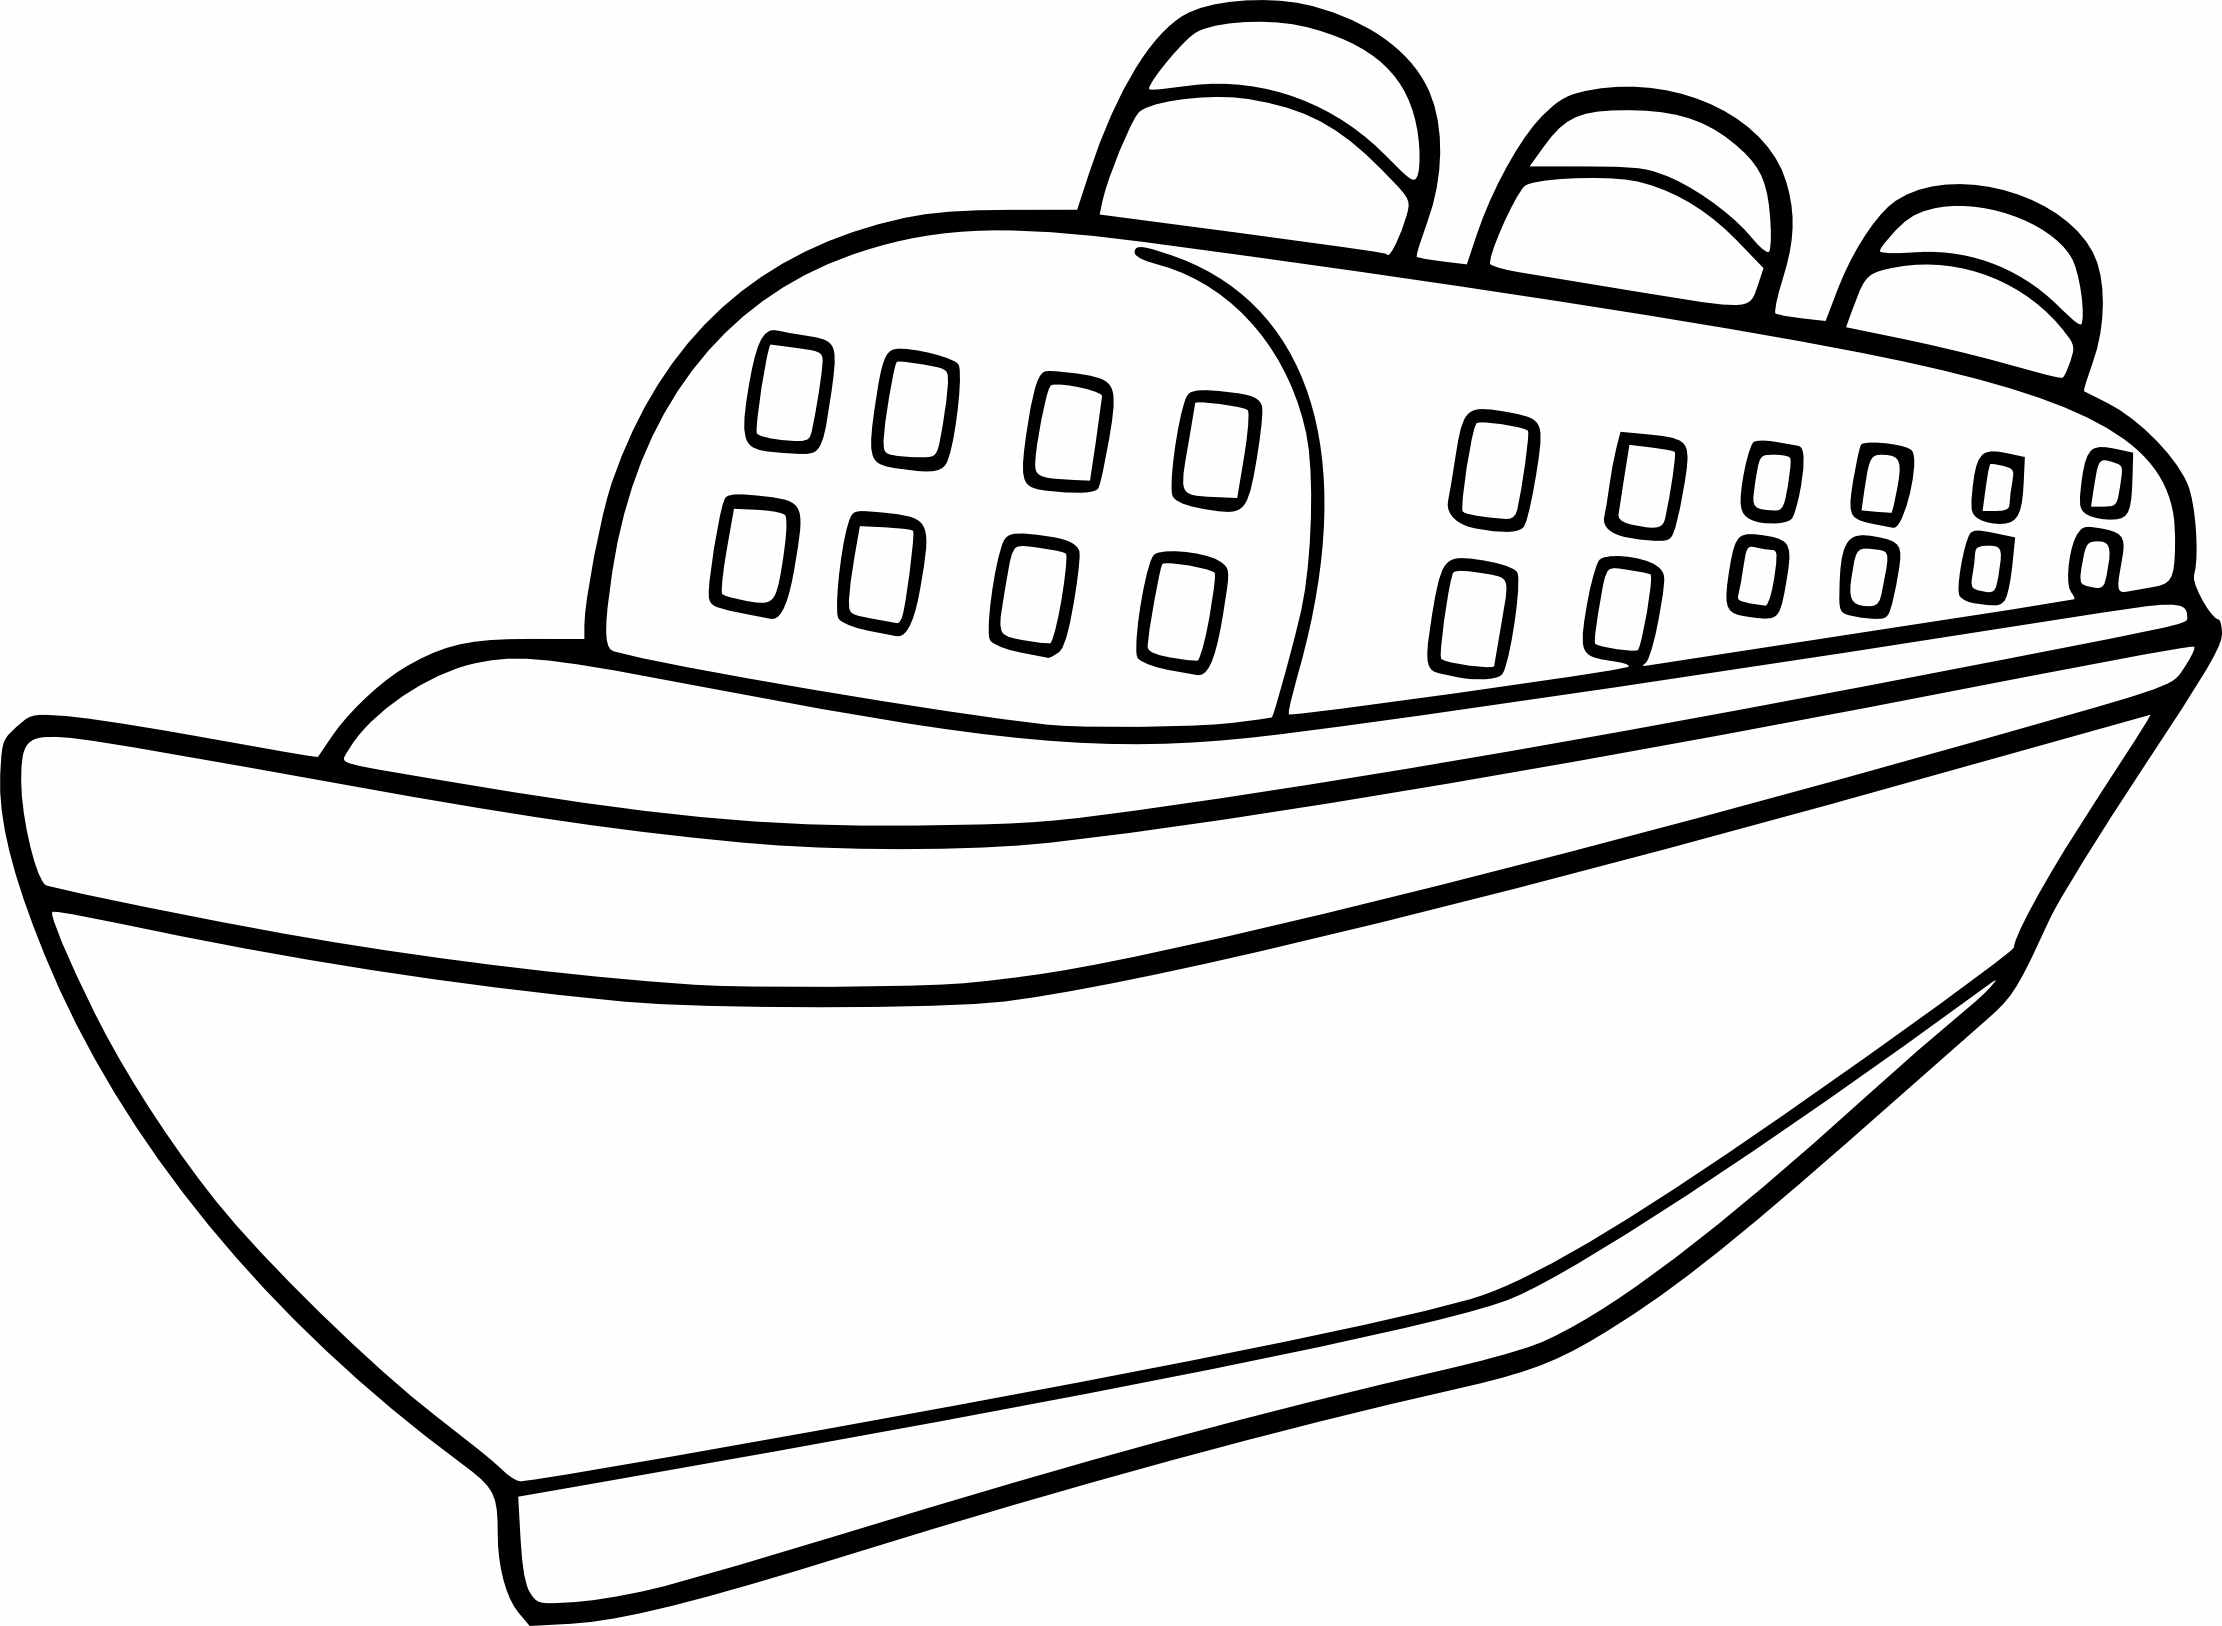 Witty ship coloring pages for kids